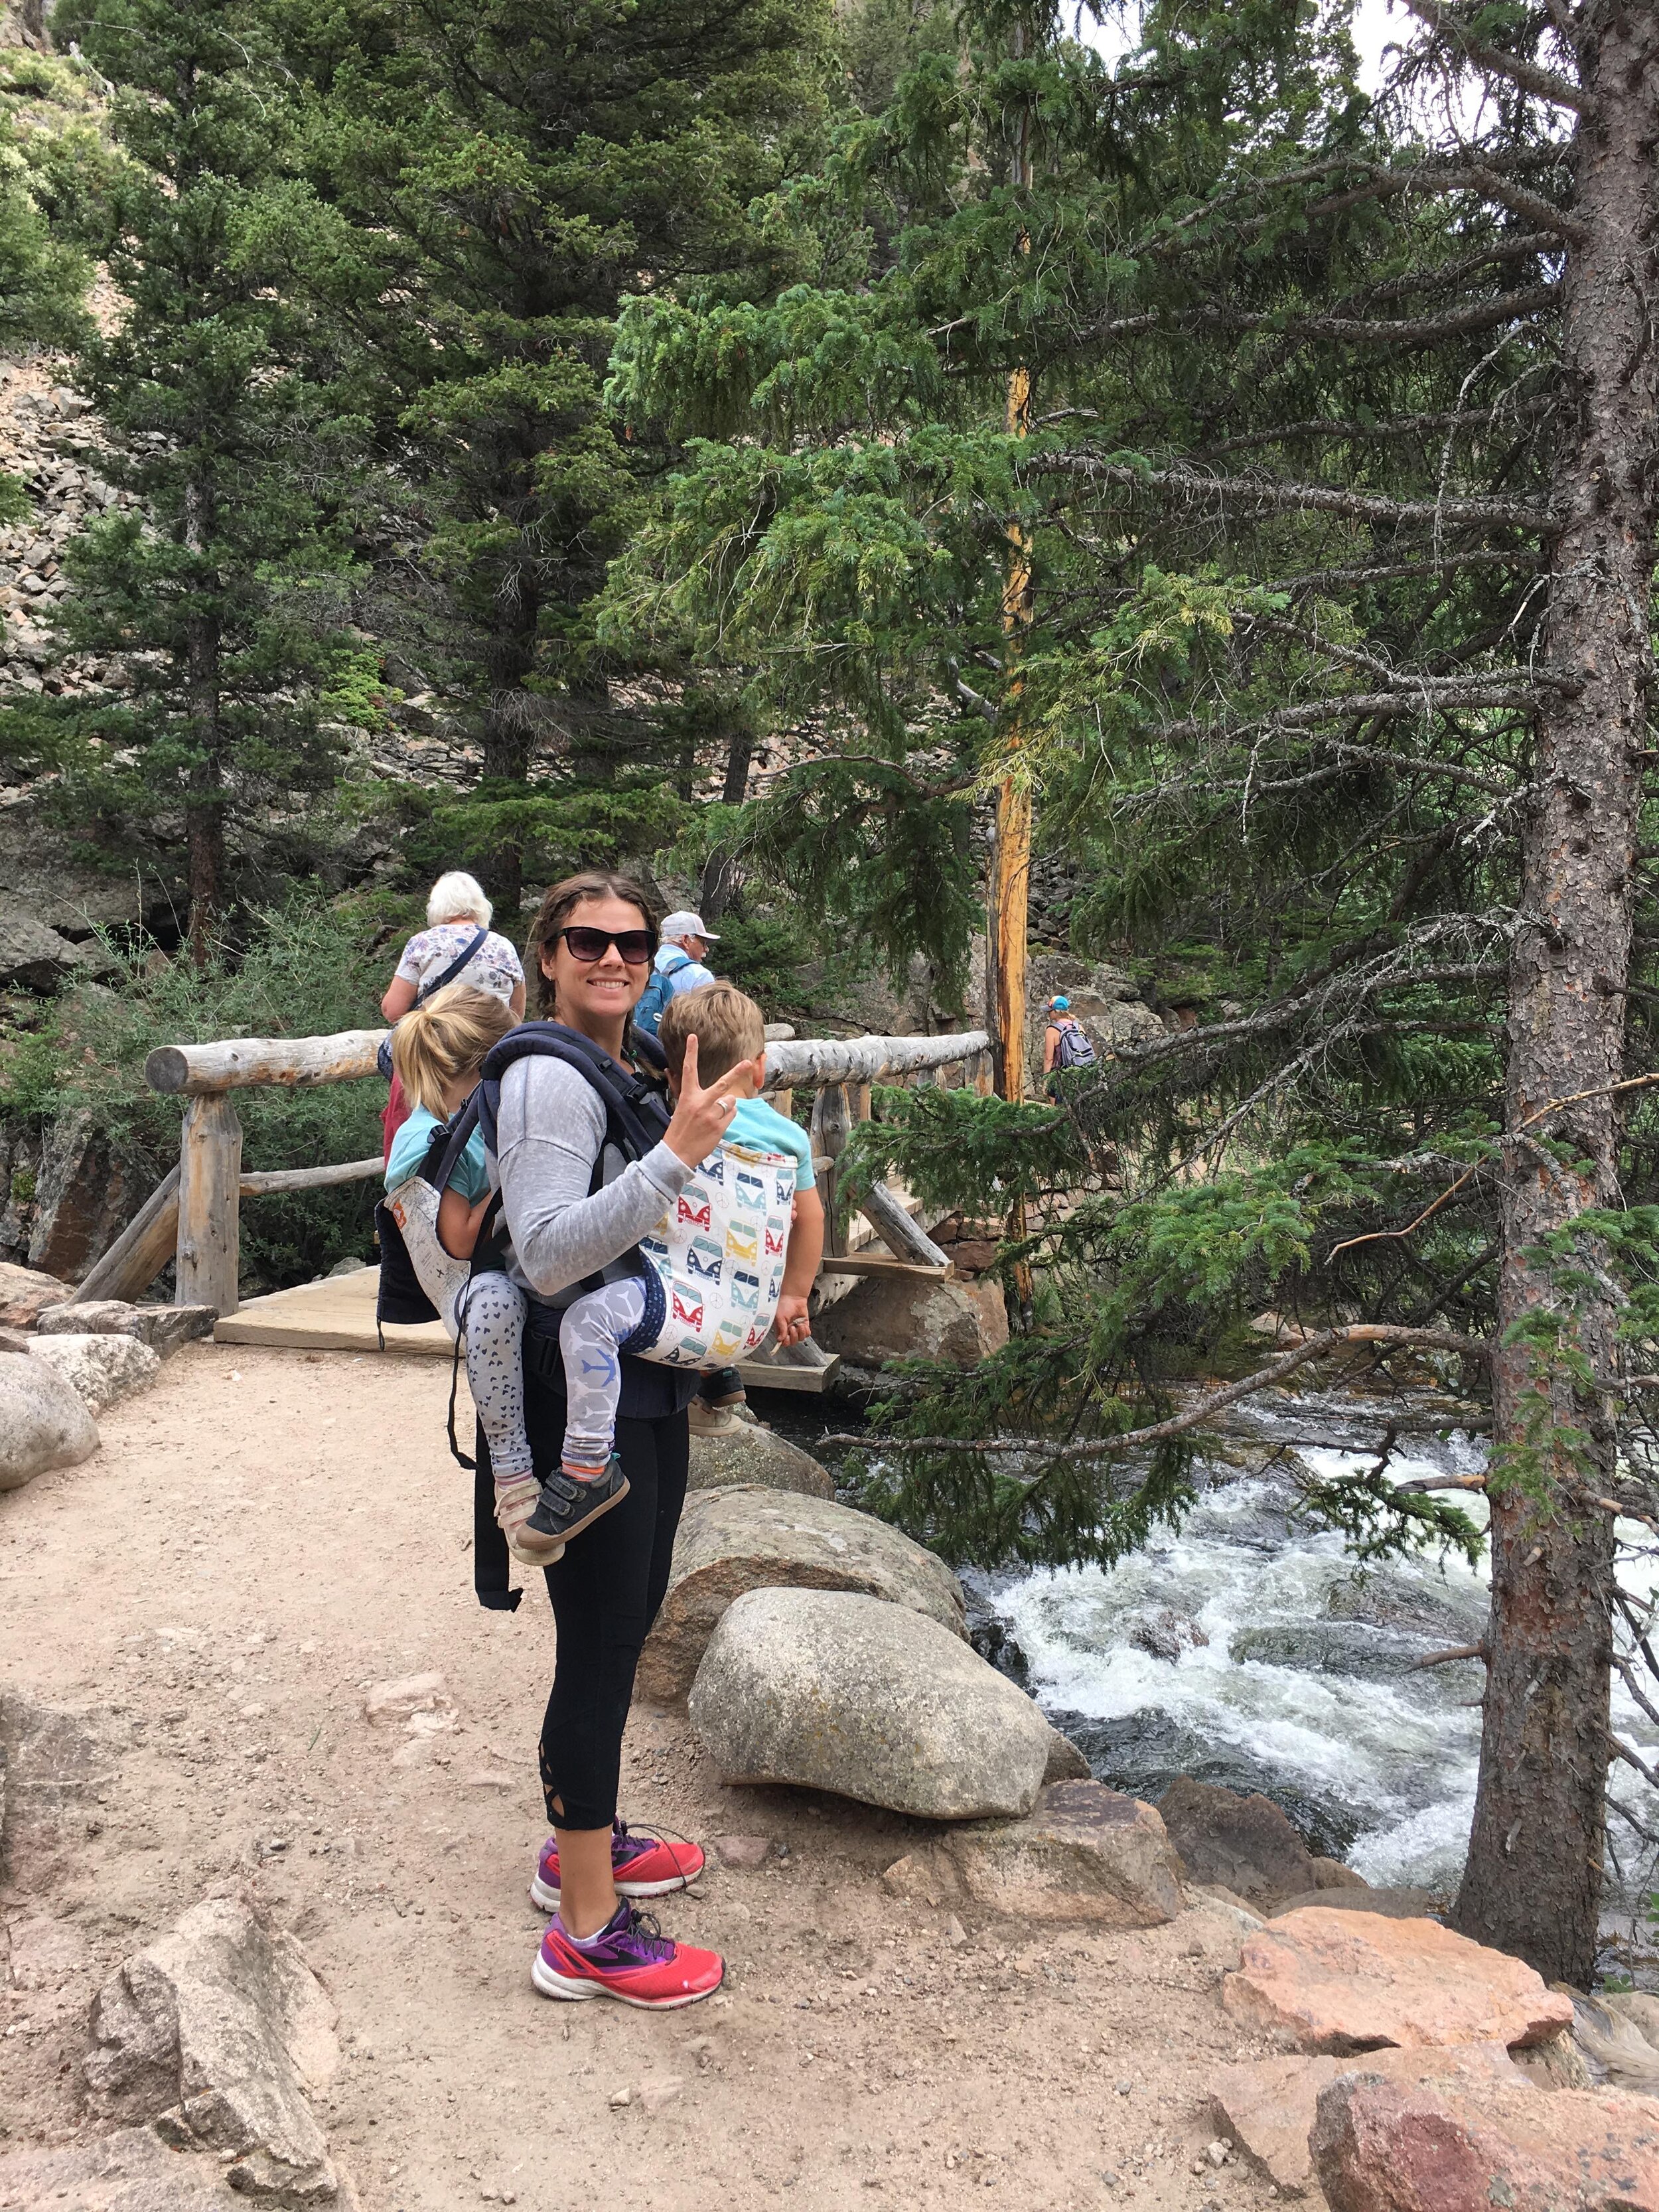 Essential Hiking Gear for Rocky Mountain National Park